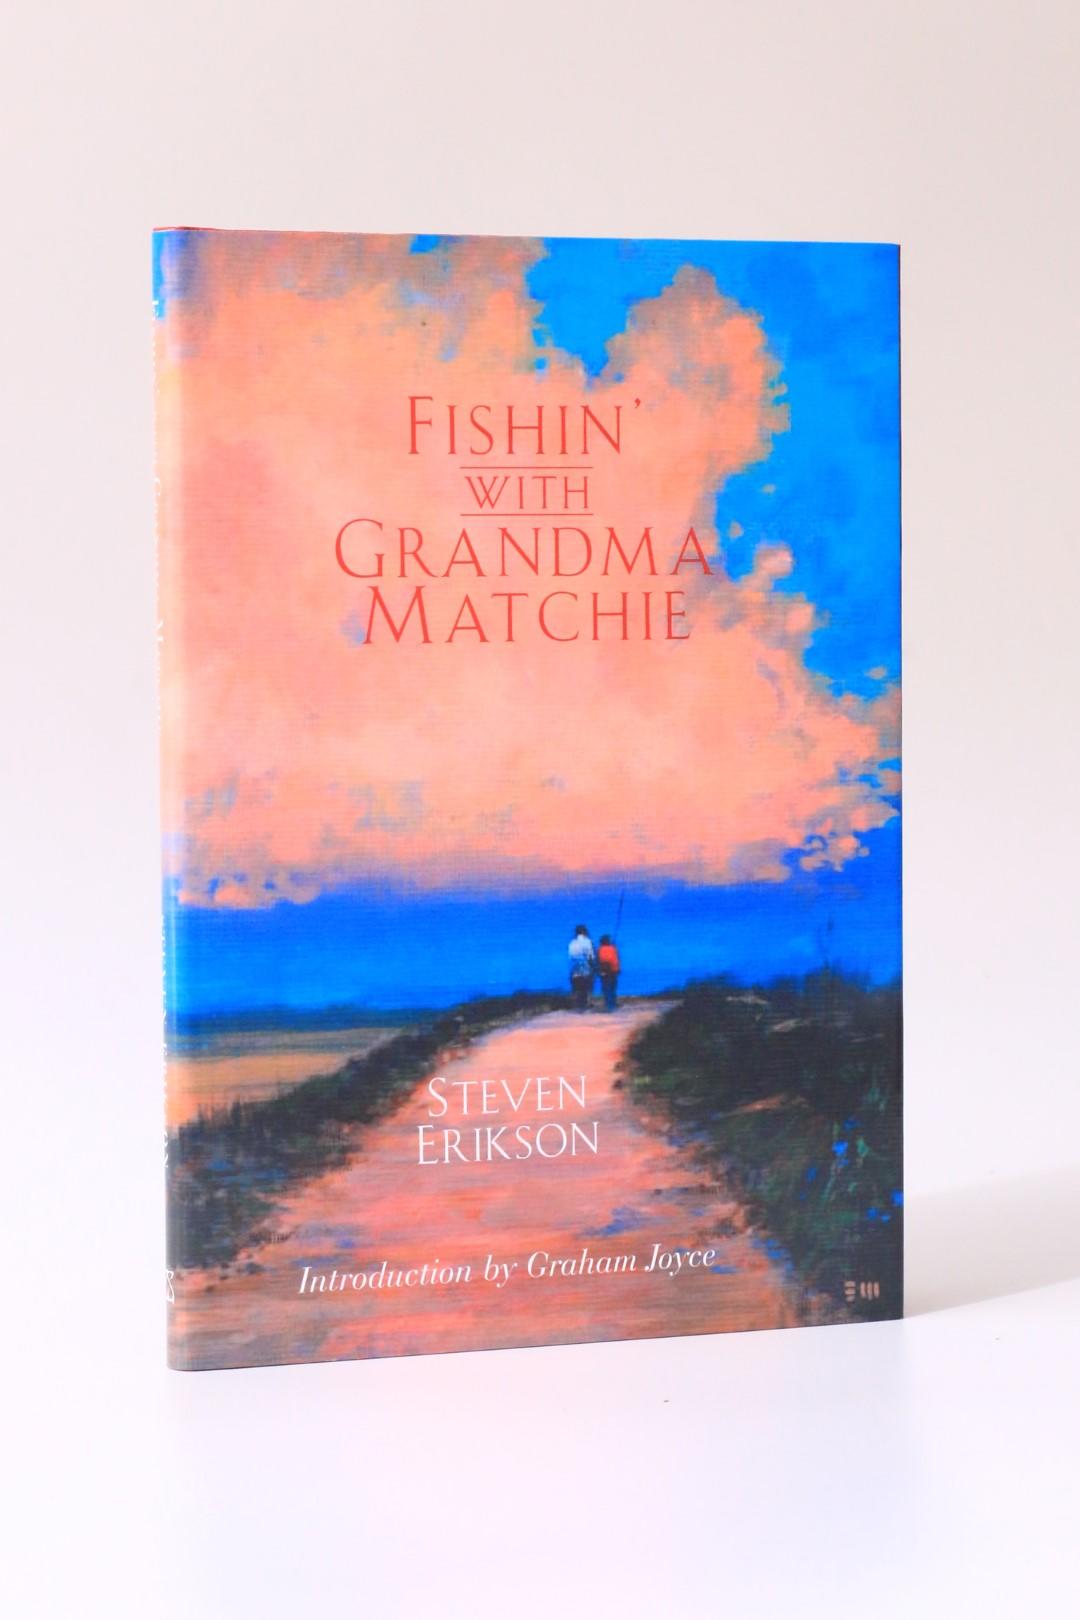 Steven Erikson - Fishin' with Grandma Matchie - PS Publishing, 2005, Signed Limited Edition.